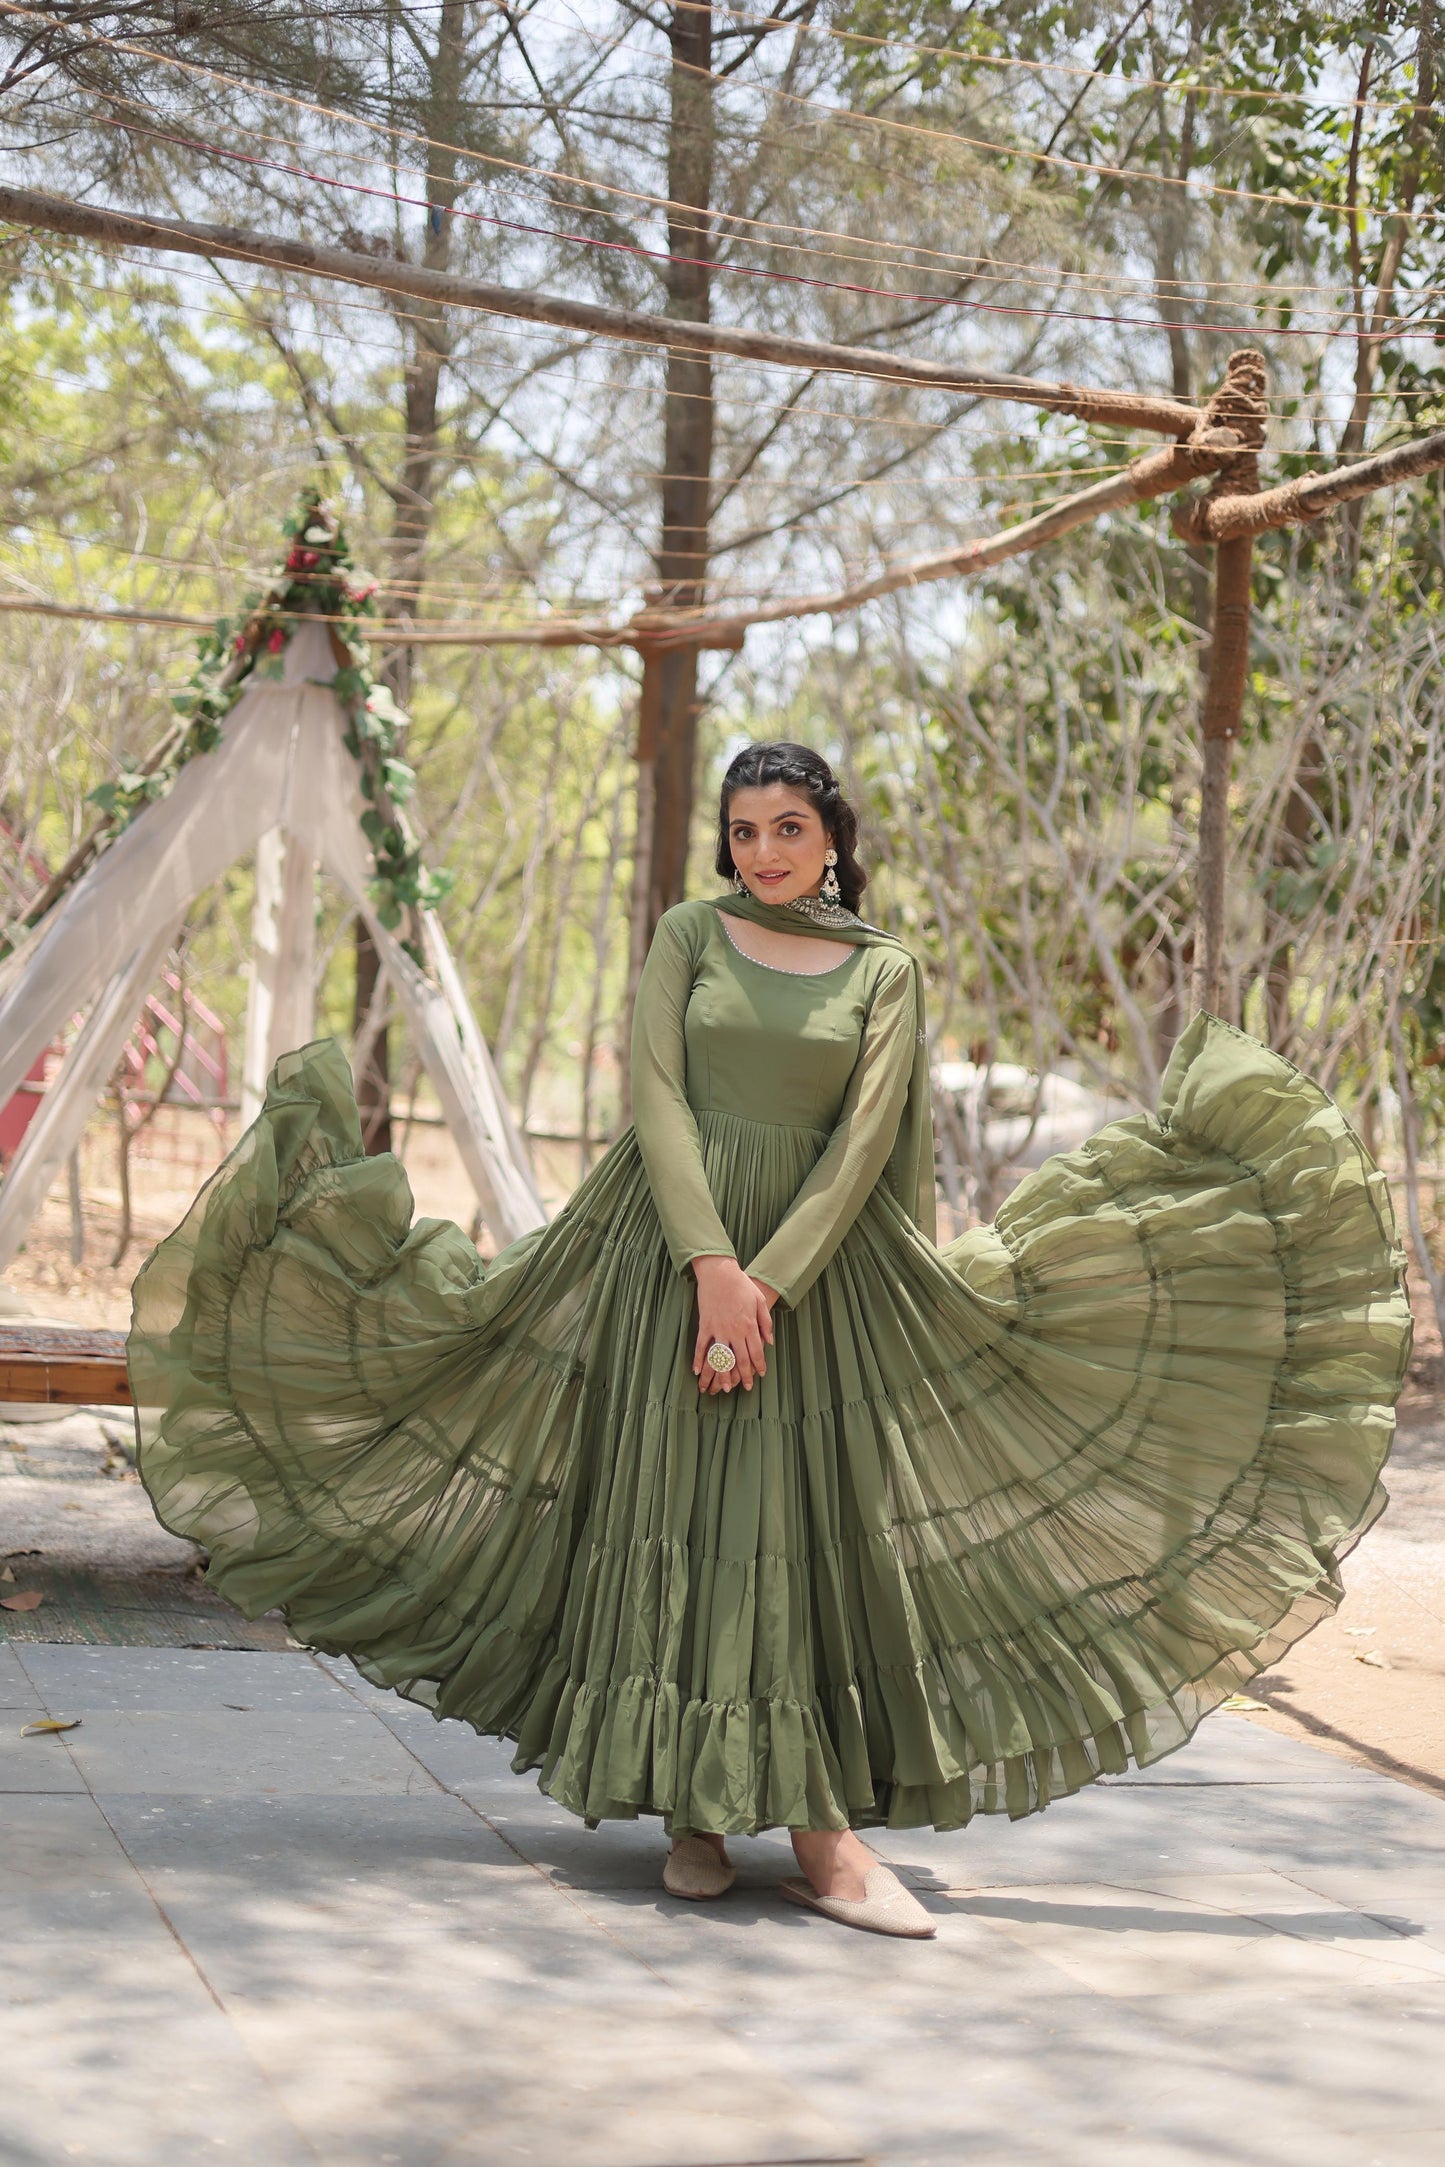 Green Fully Flared Gown with Designer Embroidered Dupatta - Inayakhan Shop 